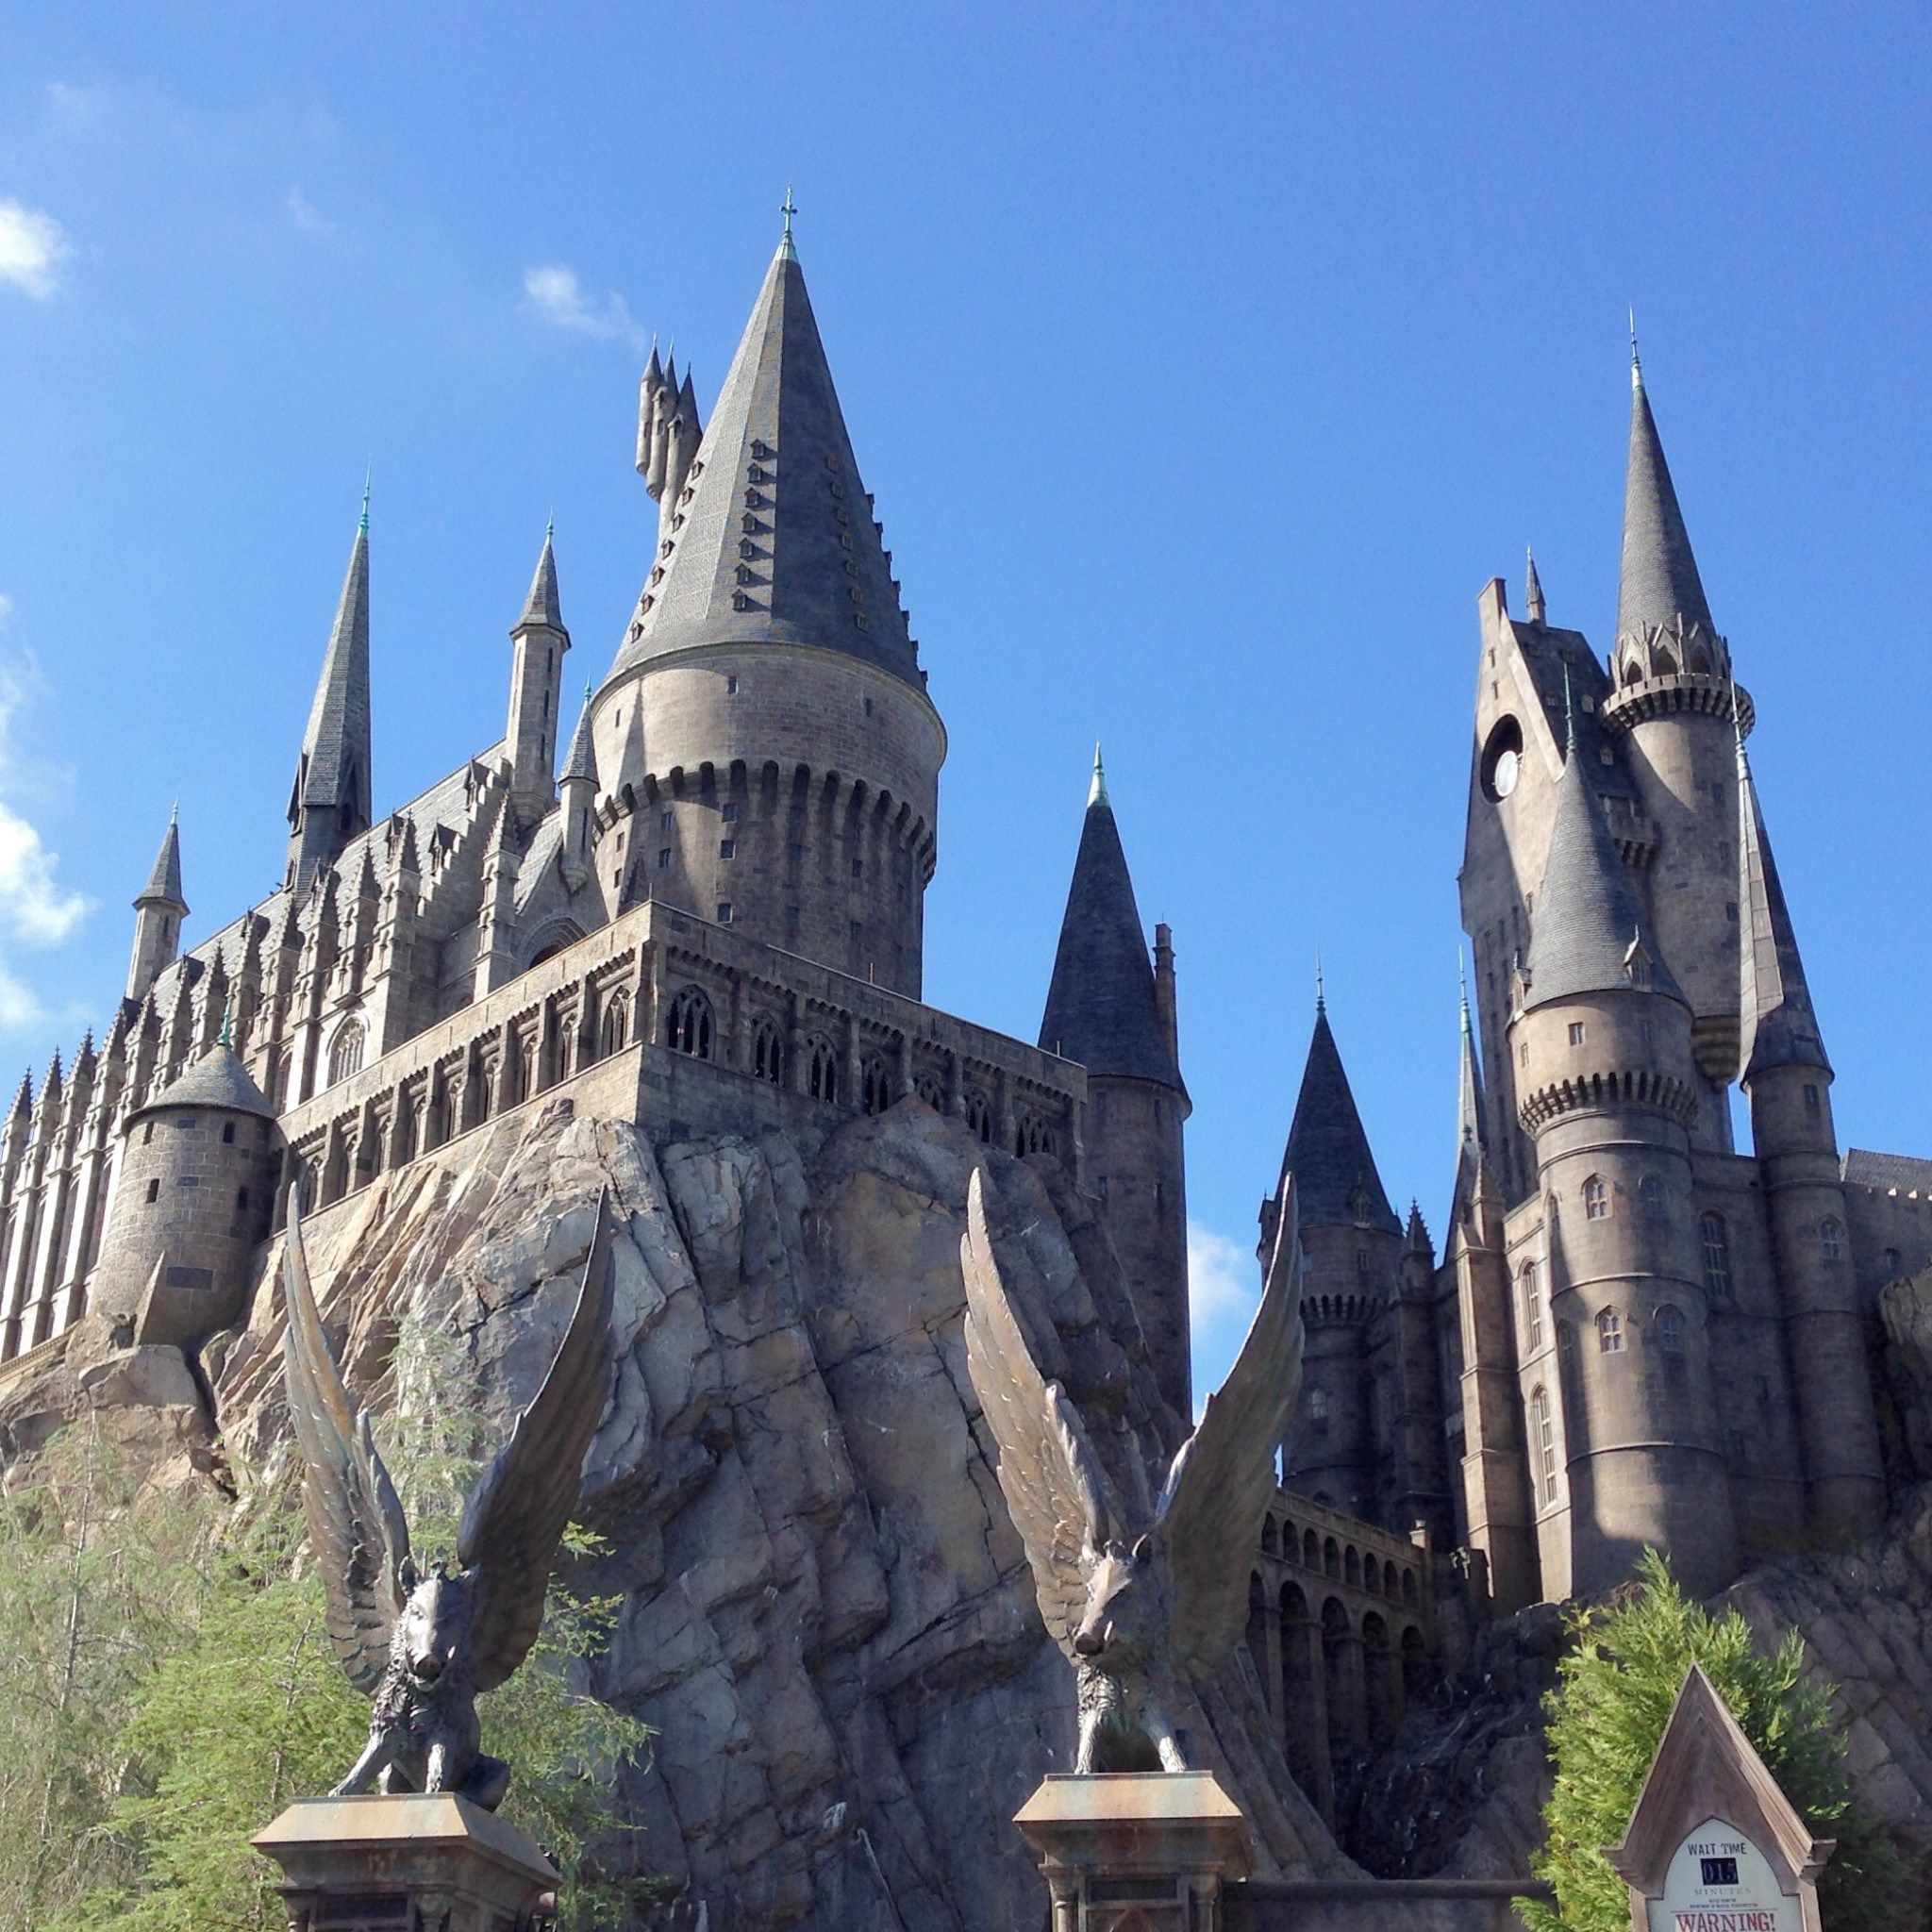 The Wizarding World of Harry Potter (With images)